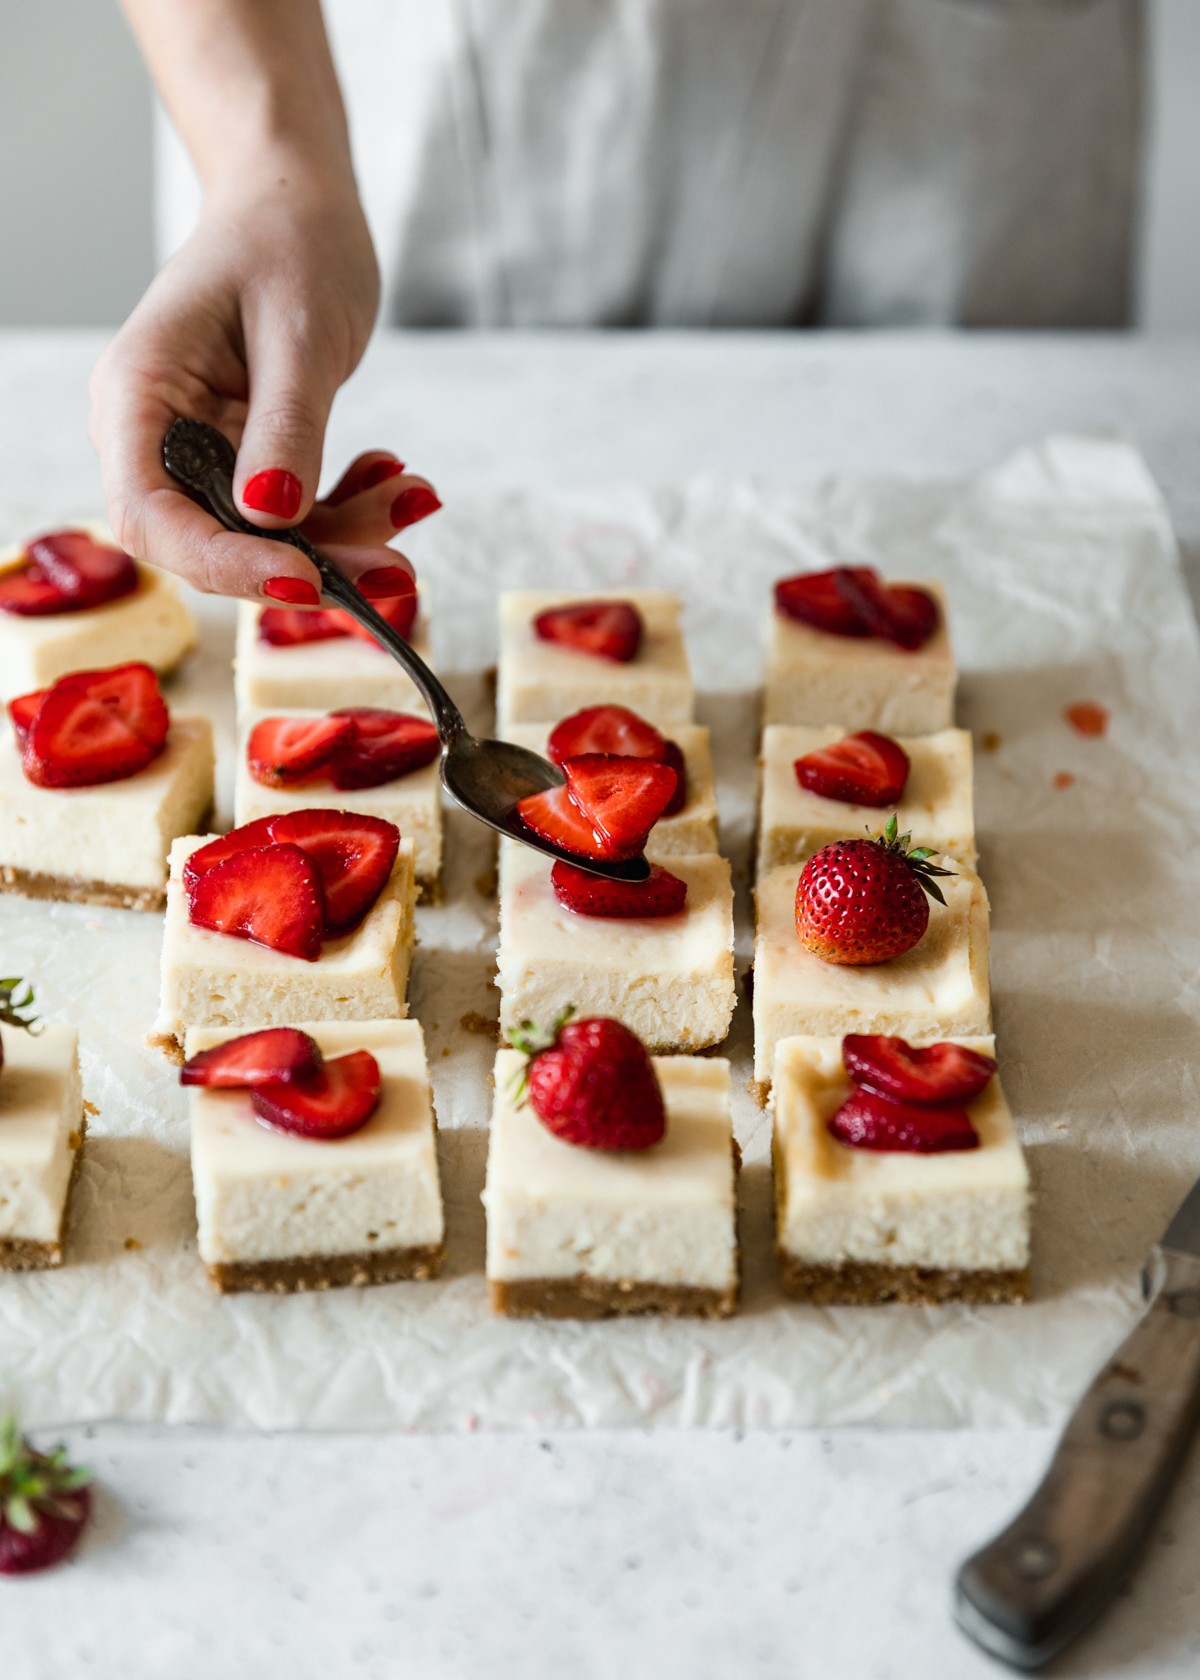 Rows of strawberry cheesecake bars on white parchment paper placed on a white counter. In the background, a woman with red finger nails wearing a beige apron is spooning strawberries over one of the middle bars.